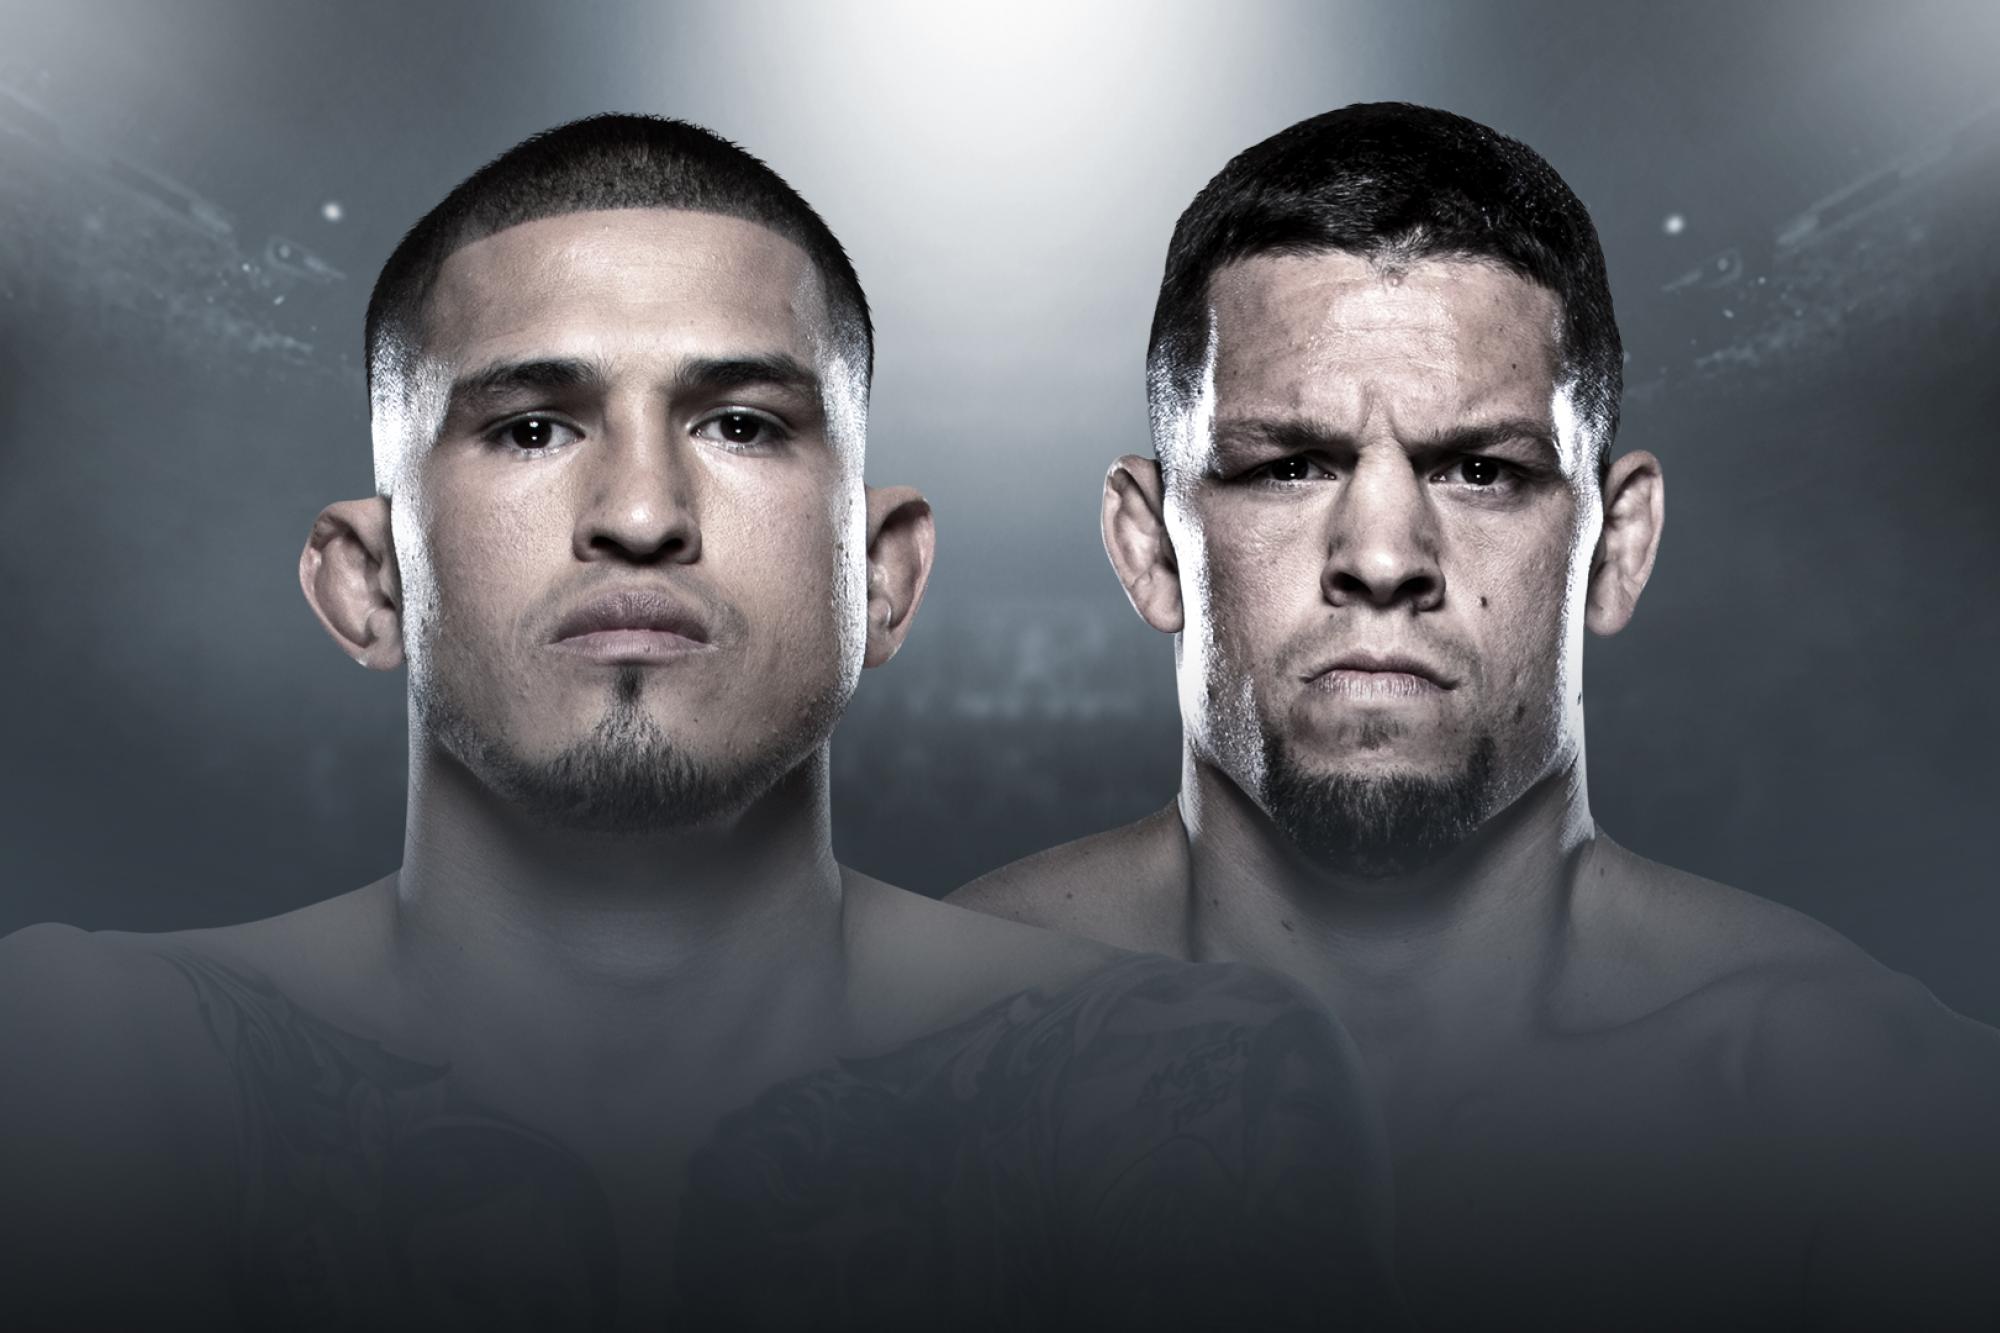 UFC 241 Nate Diaz vs Anthony Pettis: Nate Diaz to Lose His First Match Back in UFC ...2000 x 1333